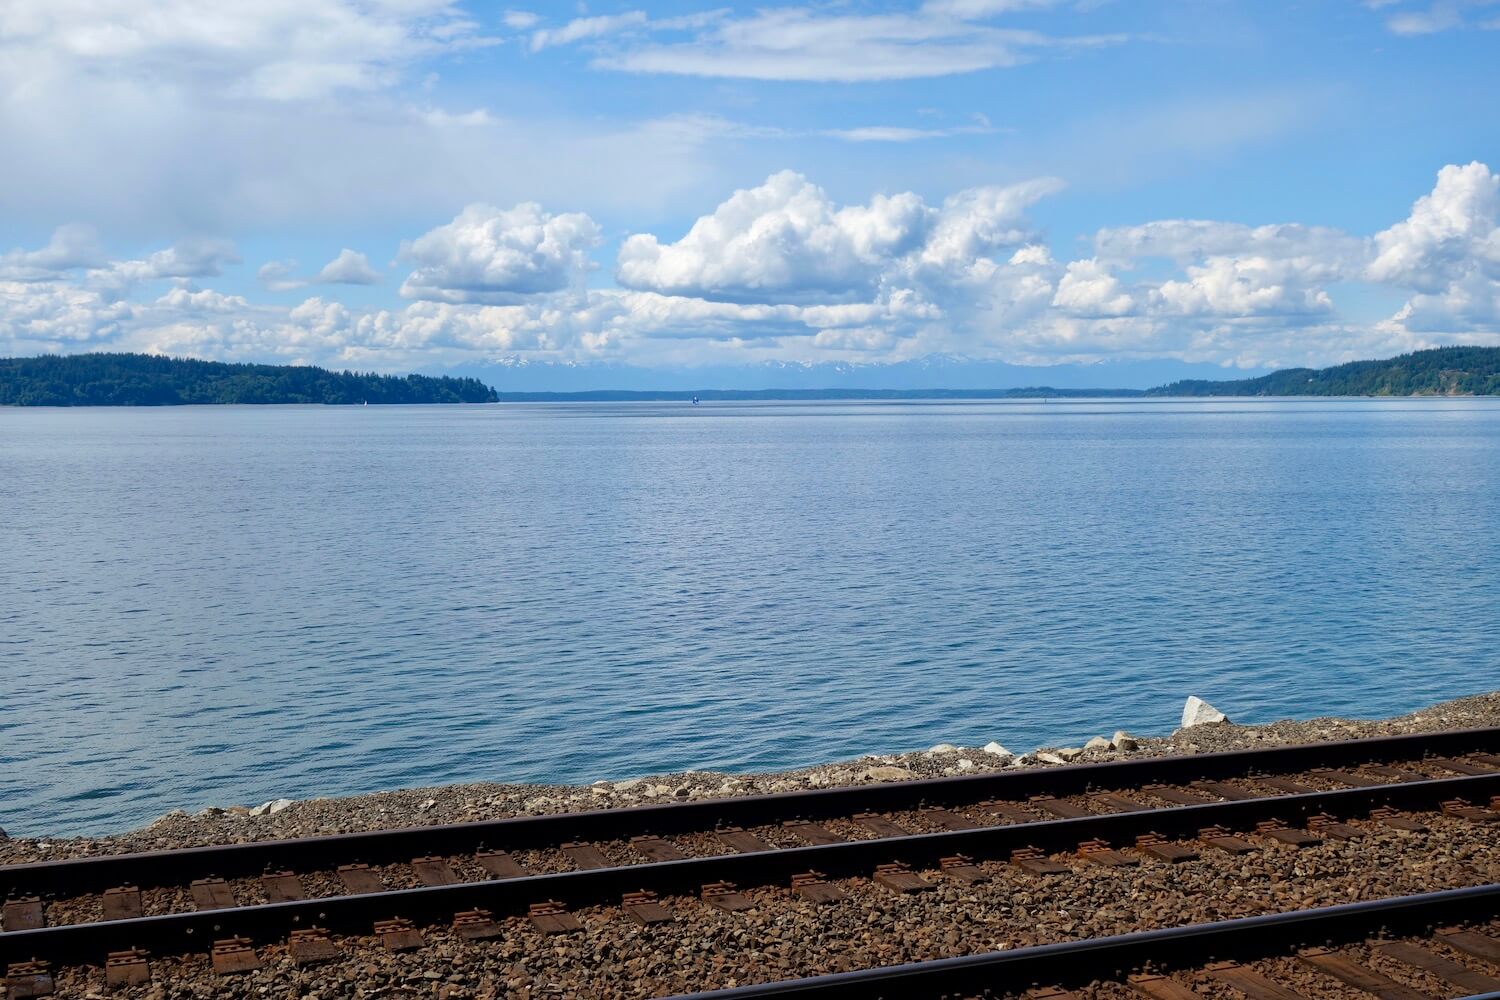 A great shot of the Salish Sea from the Seattle to Portland train.  There are two thick steel rails in a bed of gravel while the blue sea is tranquil beyond with islands and mountains in the far distance. 